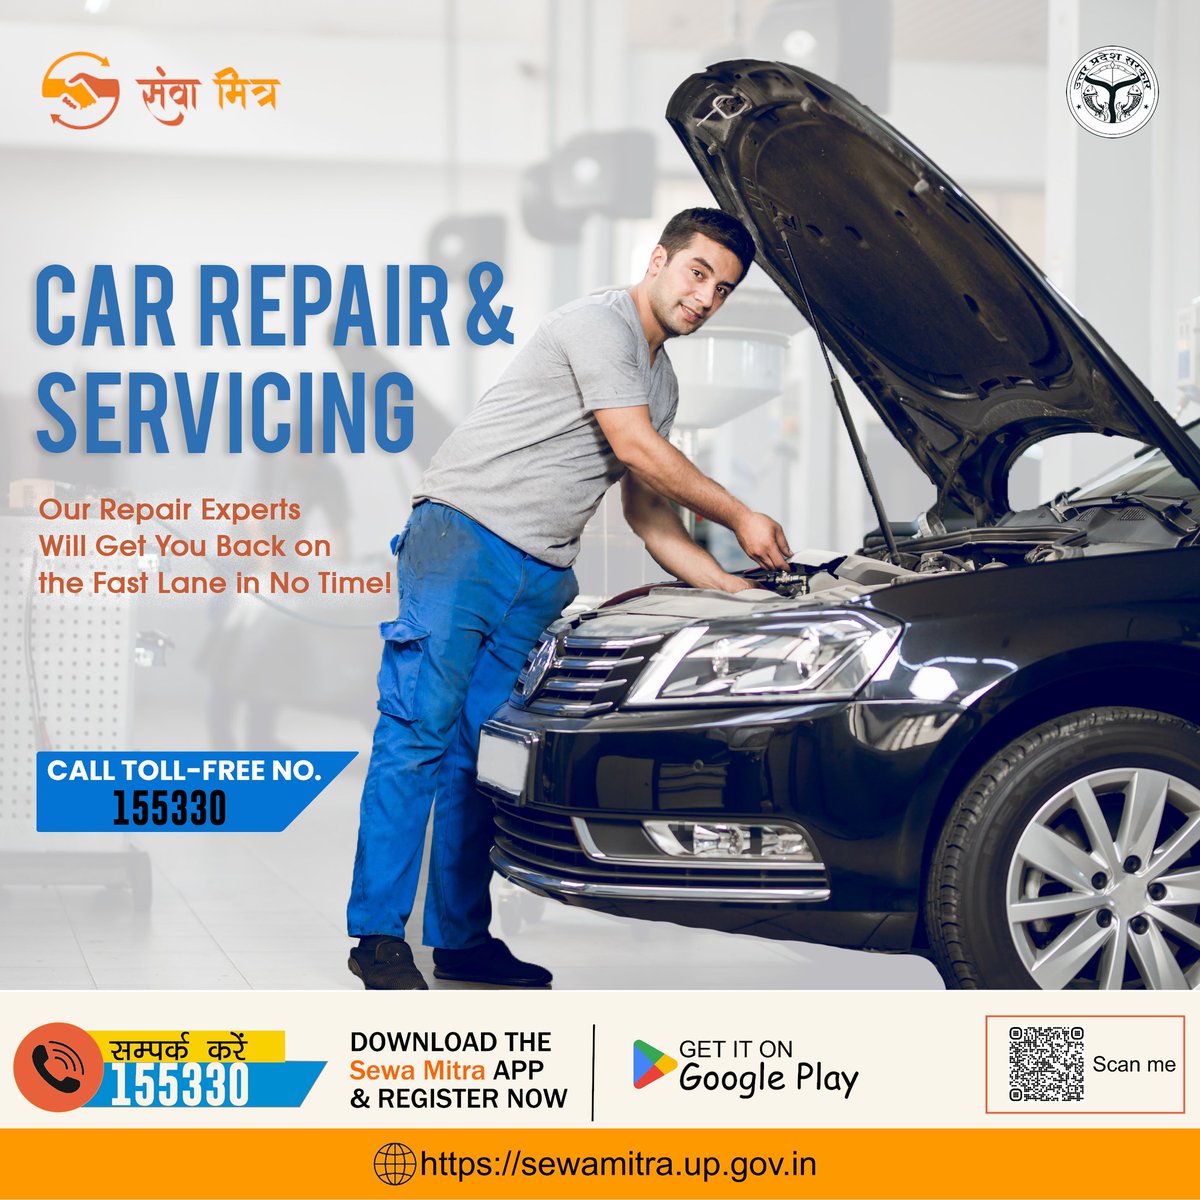 Whether It's a Squeaky Brake or a Mysterious Engine Noise, Call Toll-Free No. 155330 📞 for Top-Notch Car Repair Services! 🚗✨

visit: sewamitra.up.gov.in

#Sewamitra #Sewamitraservices #carrepair #carmaintenance #autorepair #mechanic #vehicle #mechaniclife #carproblems